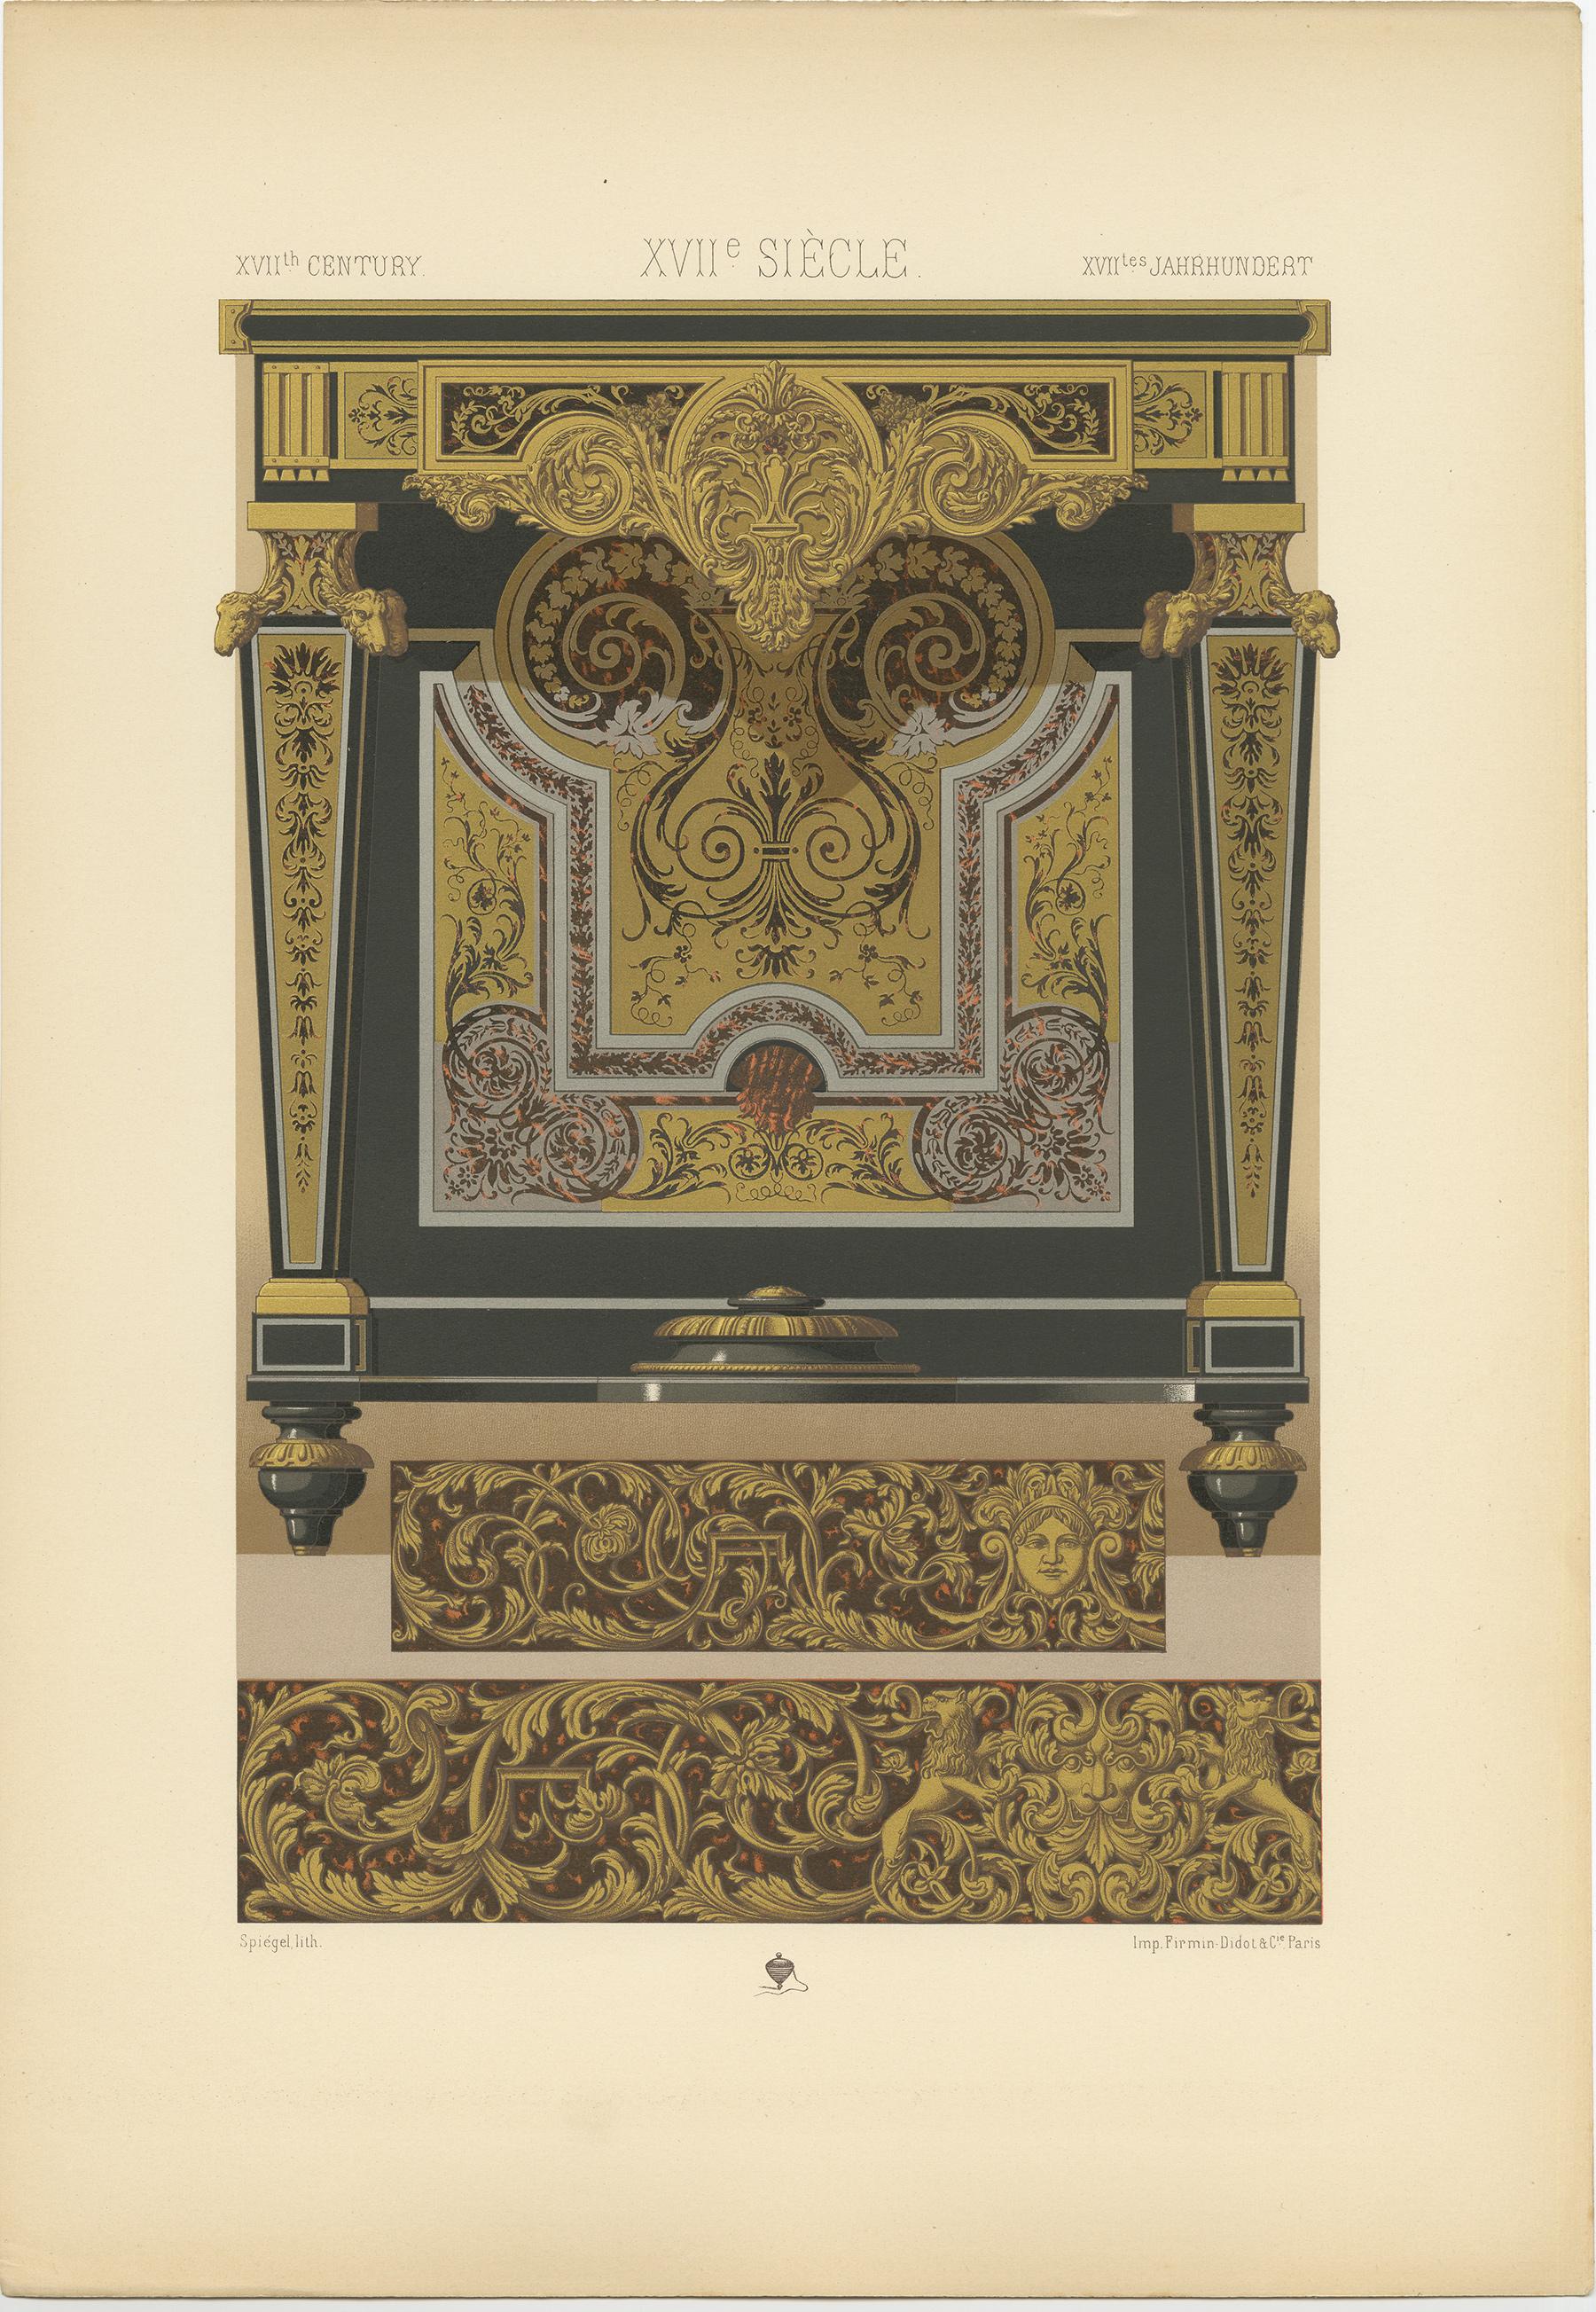 Antique print titled '17th Century - XVIIc Siècle - XVIILes Jahrhundert'. Chromolithograph of console table by Charles - Andre Boulle with metallic inlay ornaments. This print originates from 'l'Ornement Polychrome' by Auguste Racinet. Published,